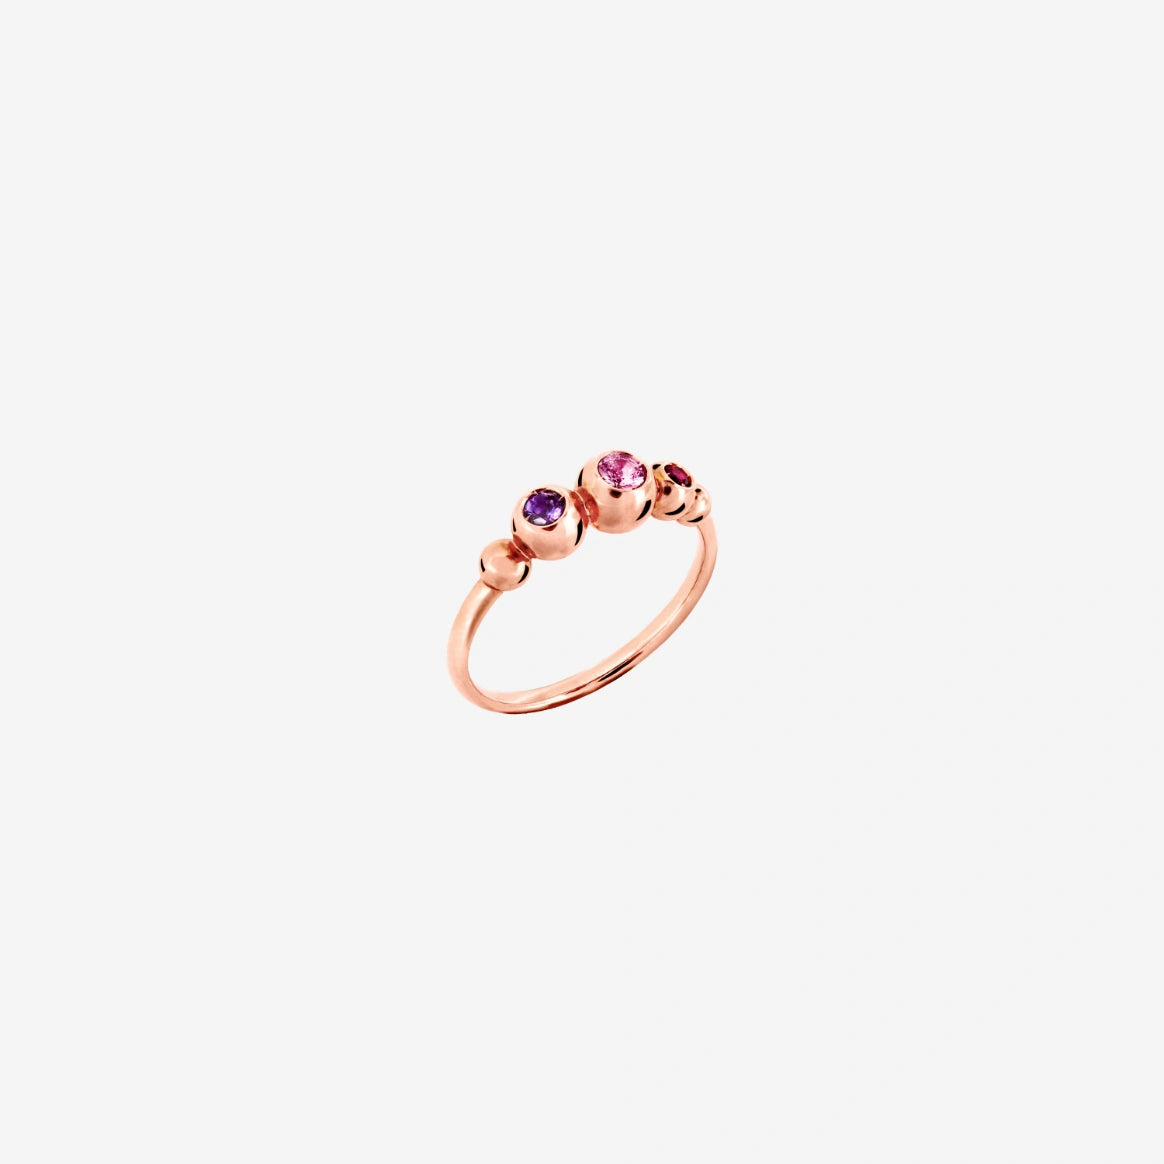 Dodo Bollicine Gemstone Ring in 9K Rose Gold with Pink Sapphire - Orsini Jewellers